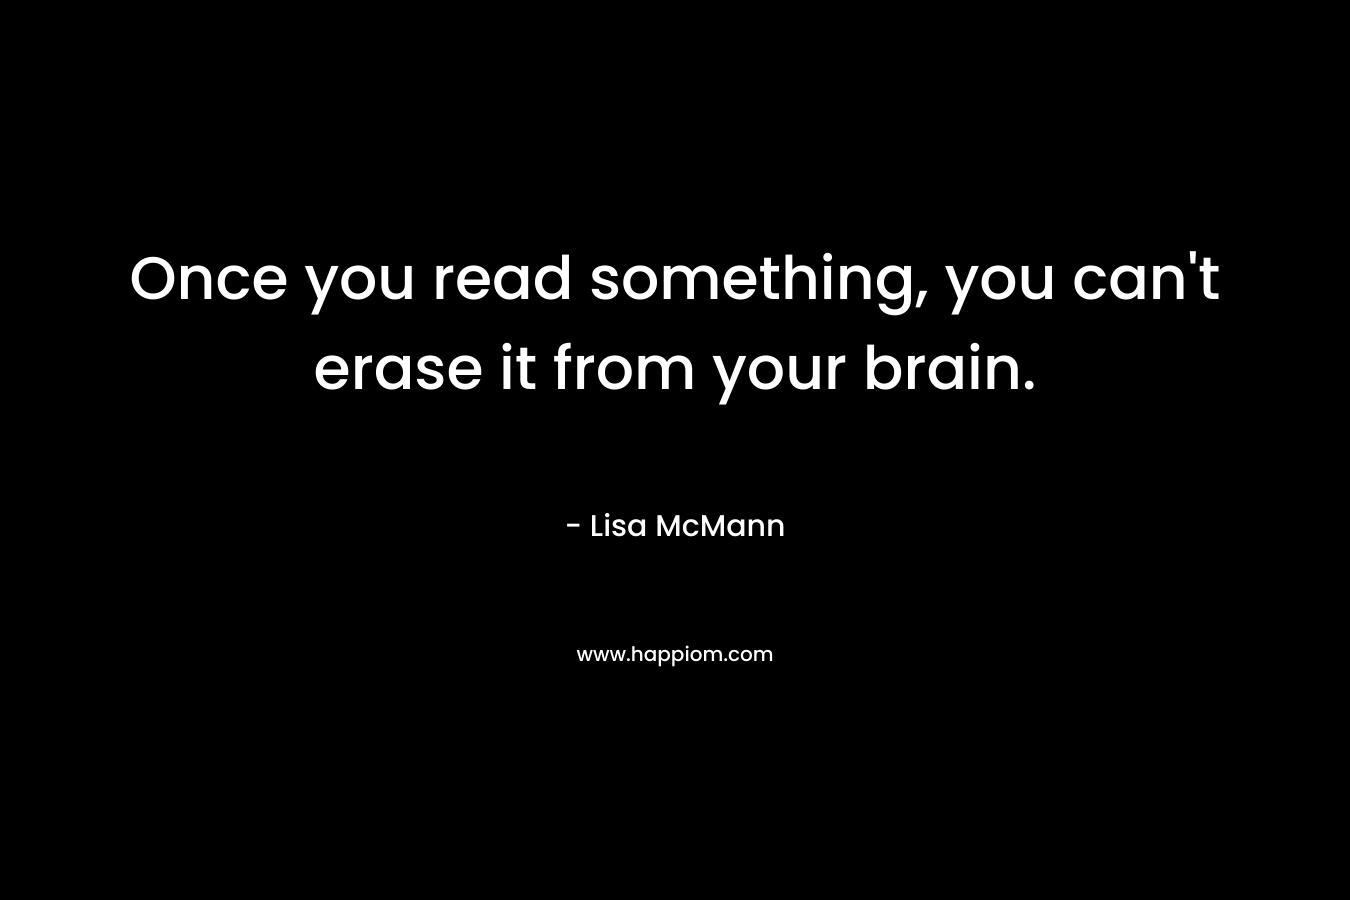 Once you read something, you can’t erase it from your brain. – Lisa McMann